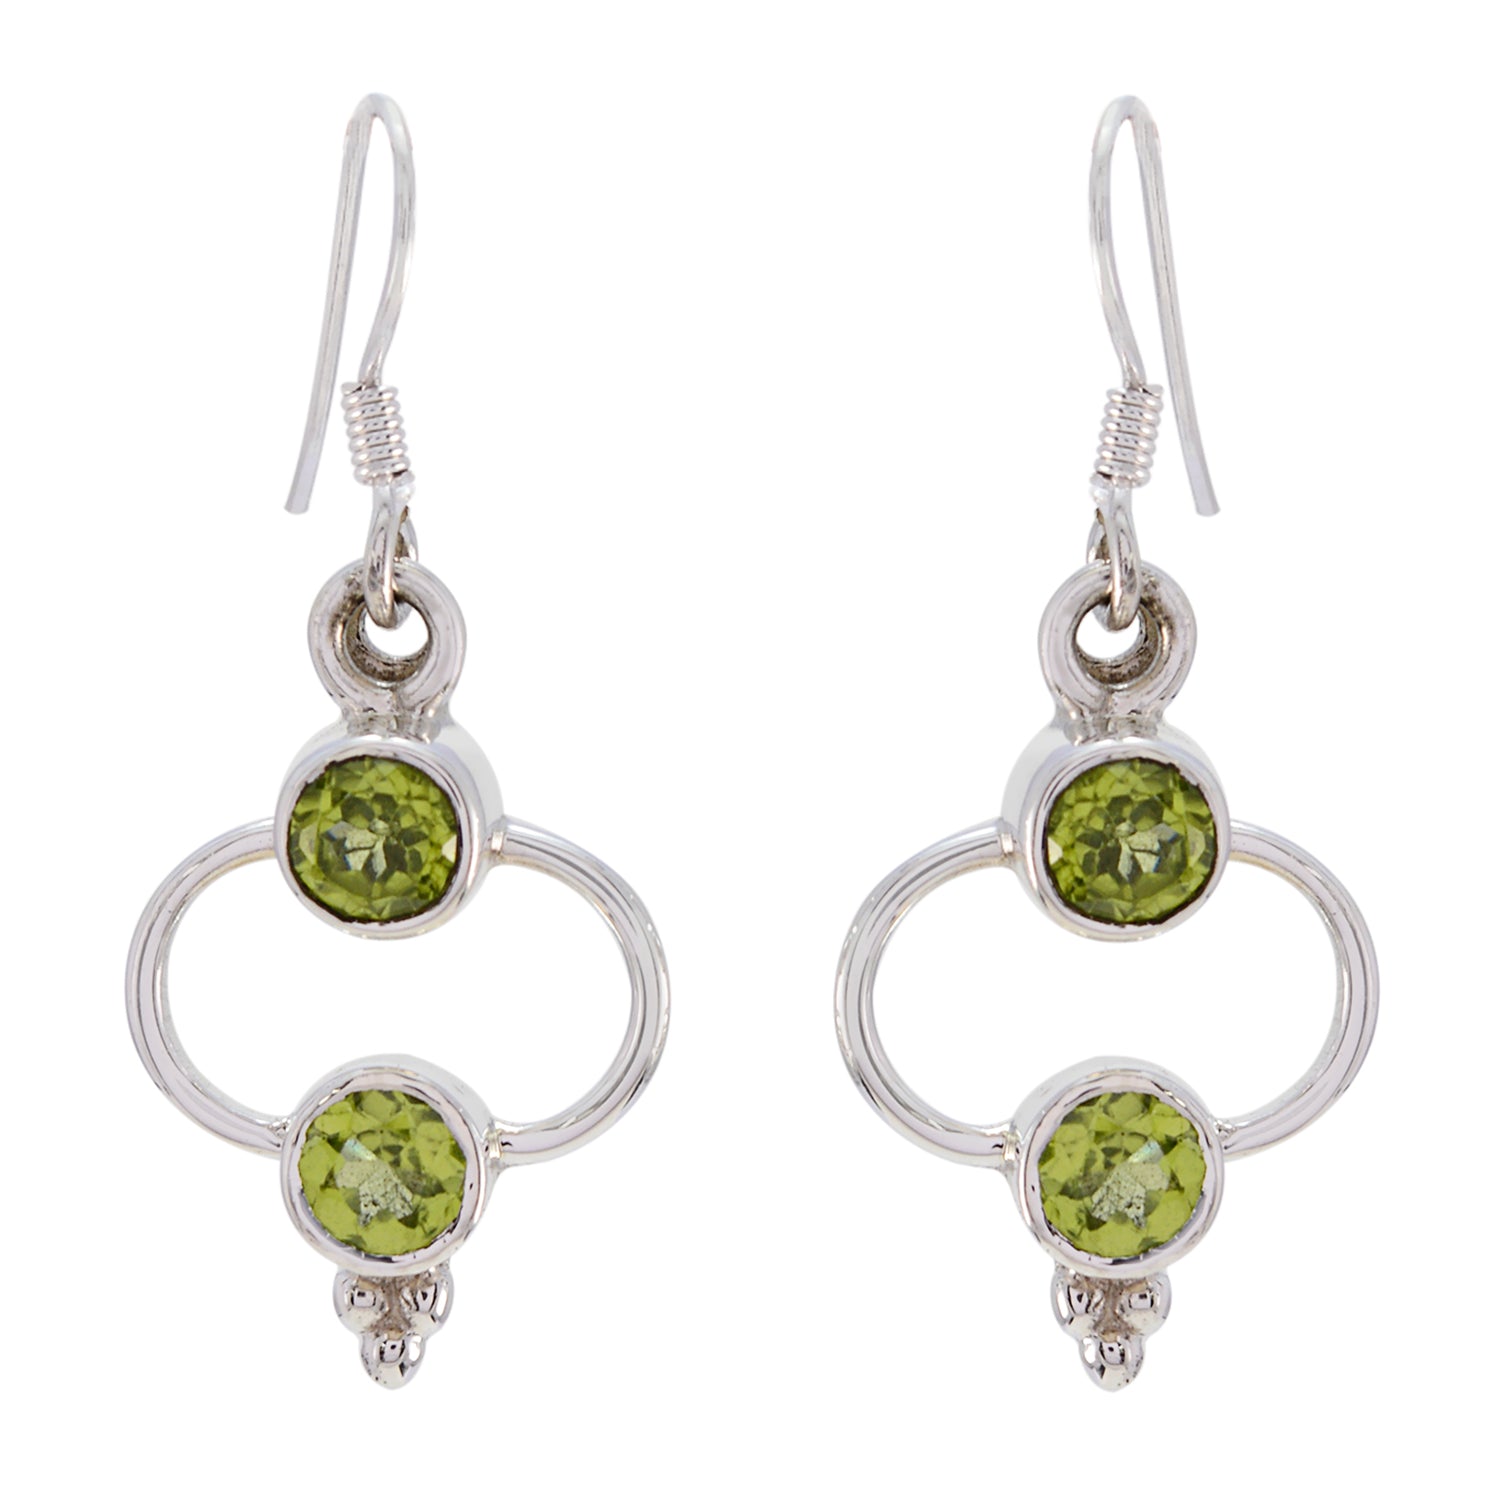 Riyo Natural Gemstone round Faceted Green Peridot Silver Earrings gift for boxing day